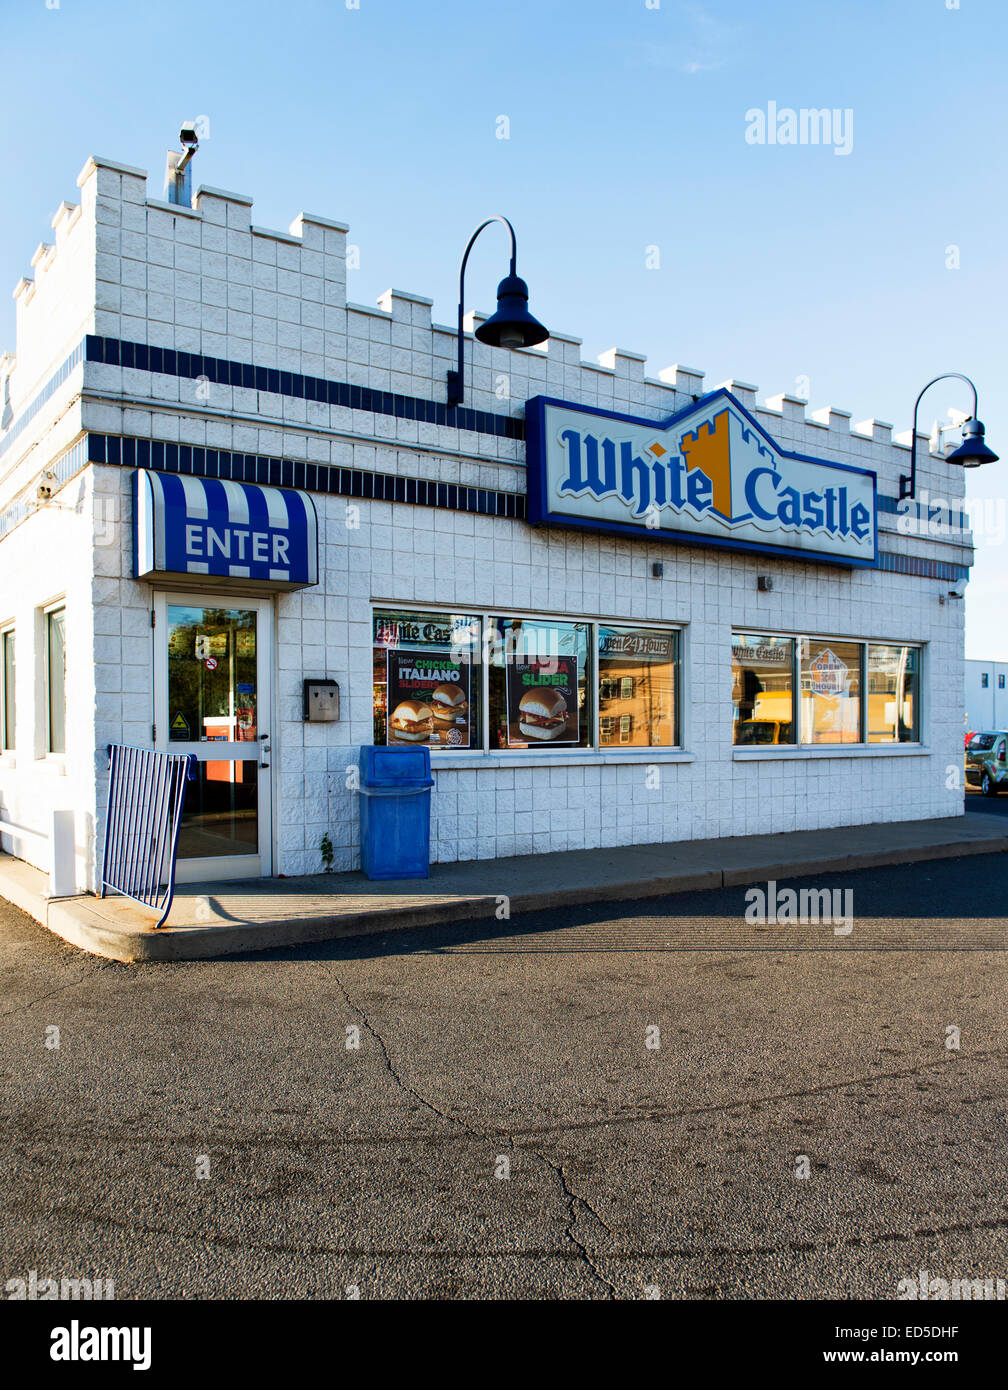 White Castle Fast Food Burger Restaurant in Linden, New Jersey Stock Photo